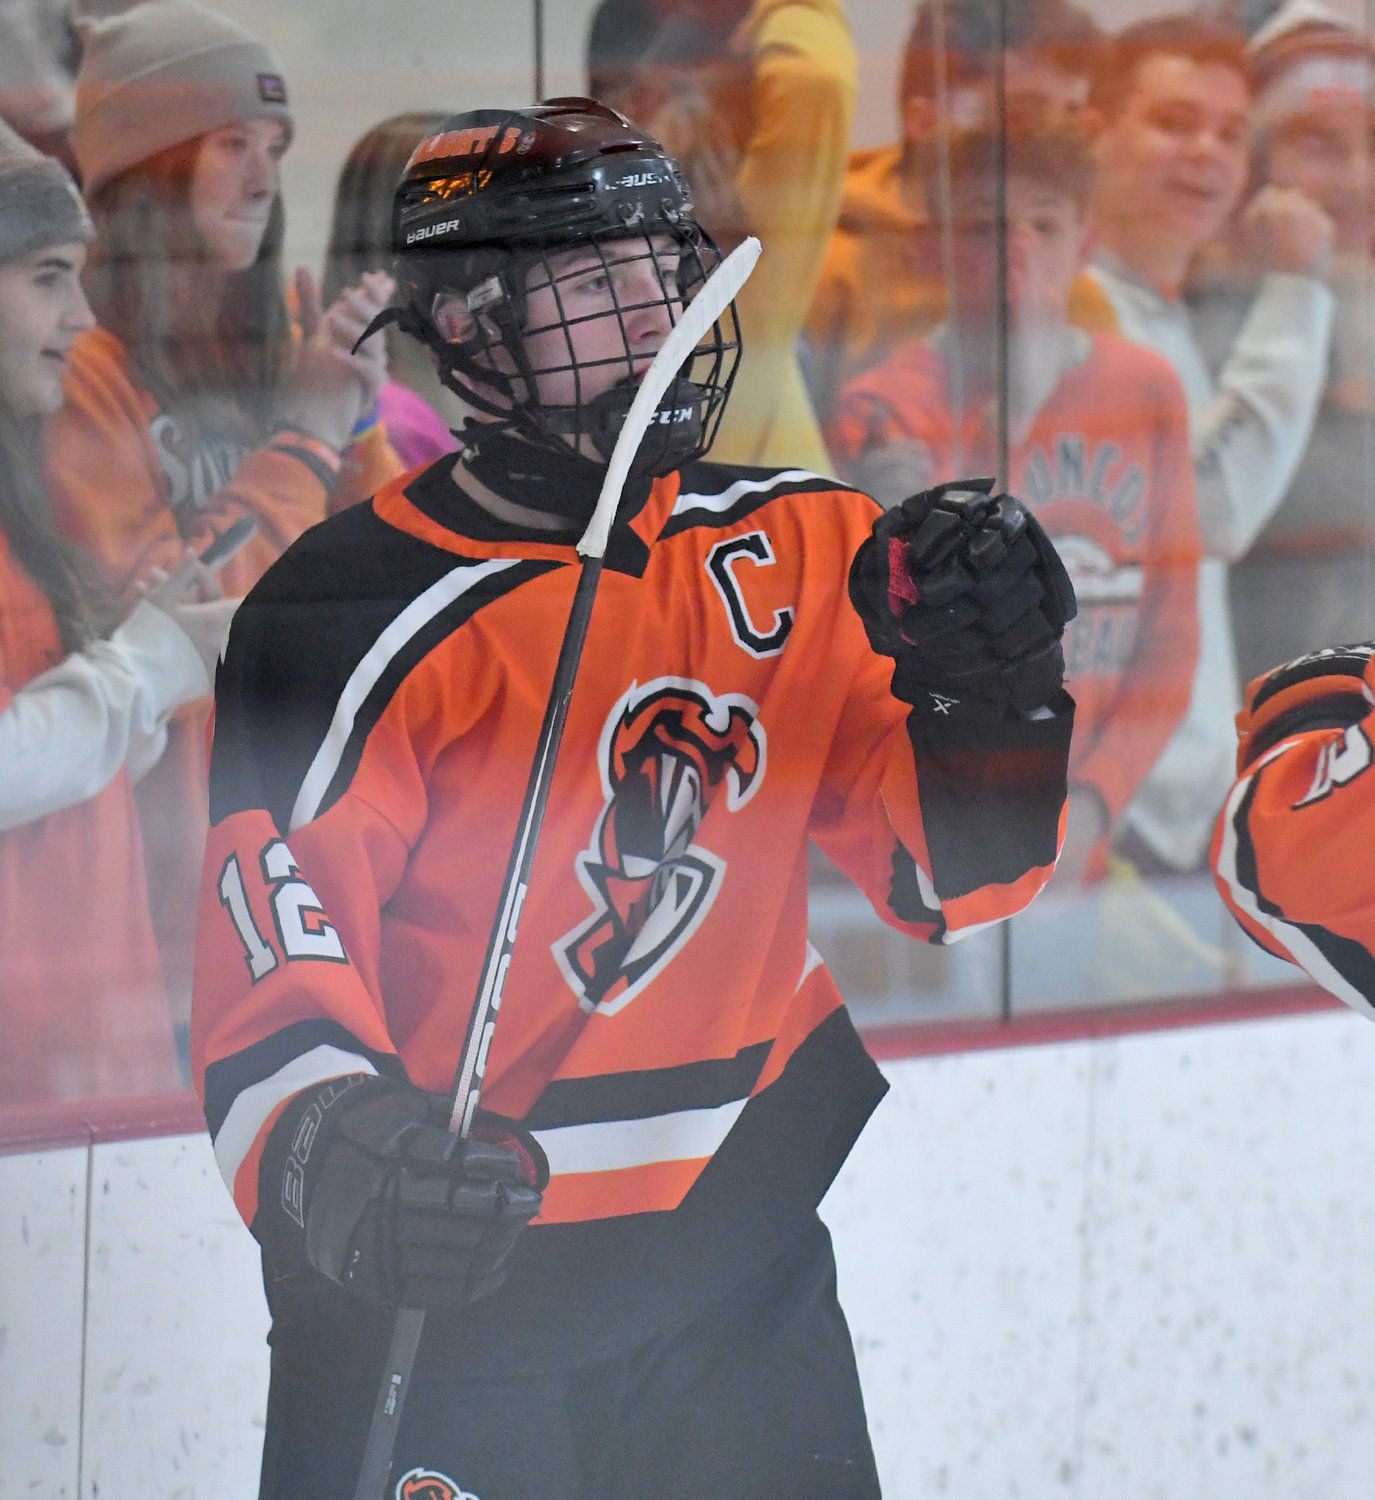 Rome Free Academy senior forward Jacob Premo celebrates a goal earlier this season. Premo was named a Section III Division 1 hockey first team all-star.